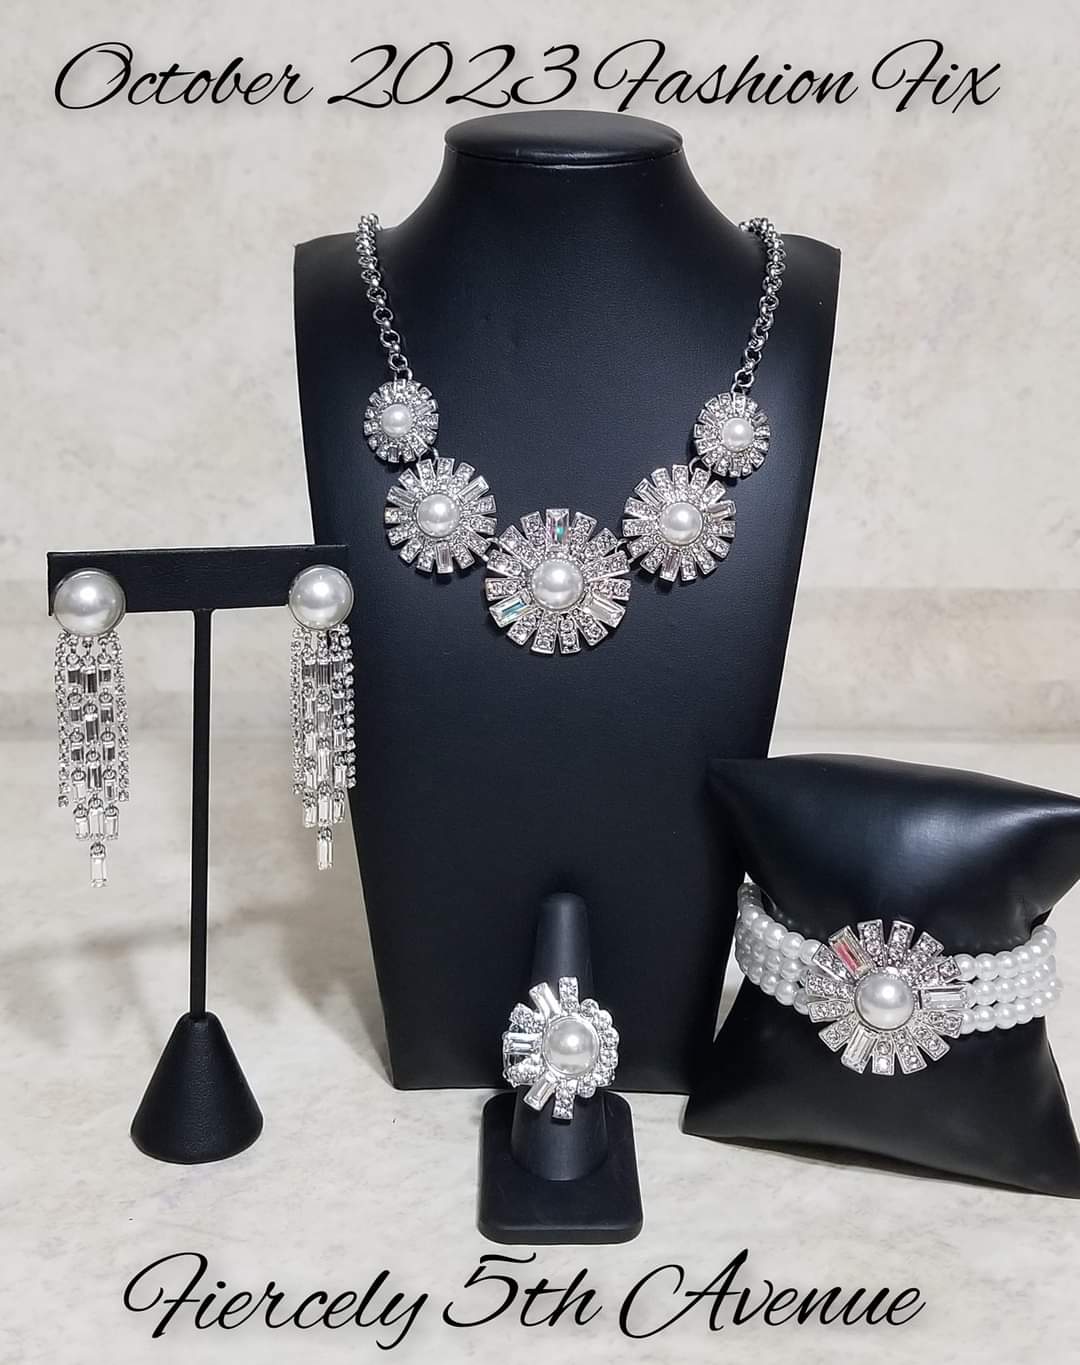 Fiercely 5th Avenue - White Pearl and Silver Jewelry Set - Paparazzi Accessories - Four piece matching jewelry set for an affordable price.